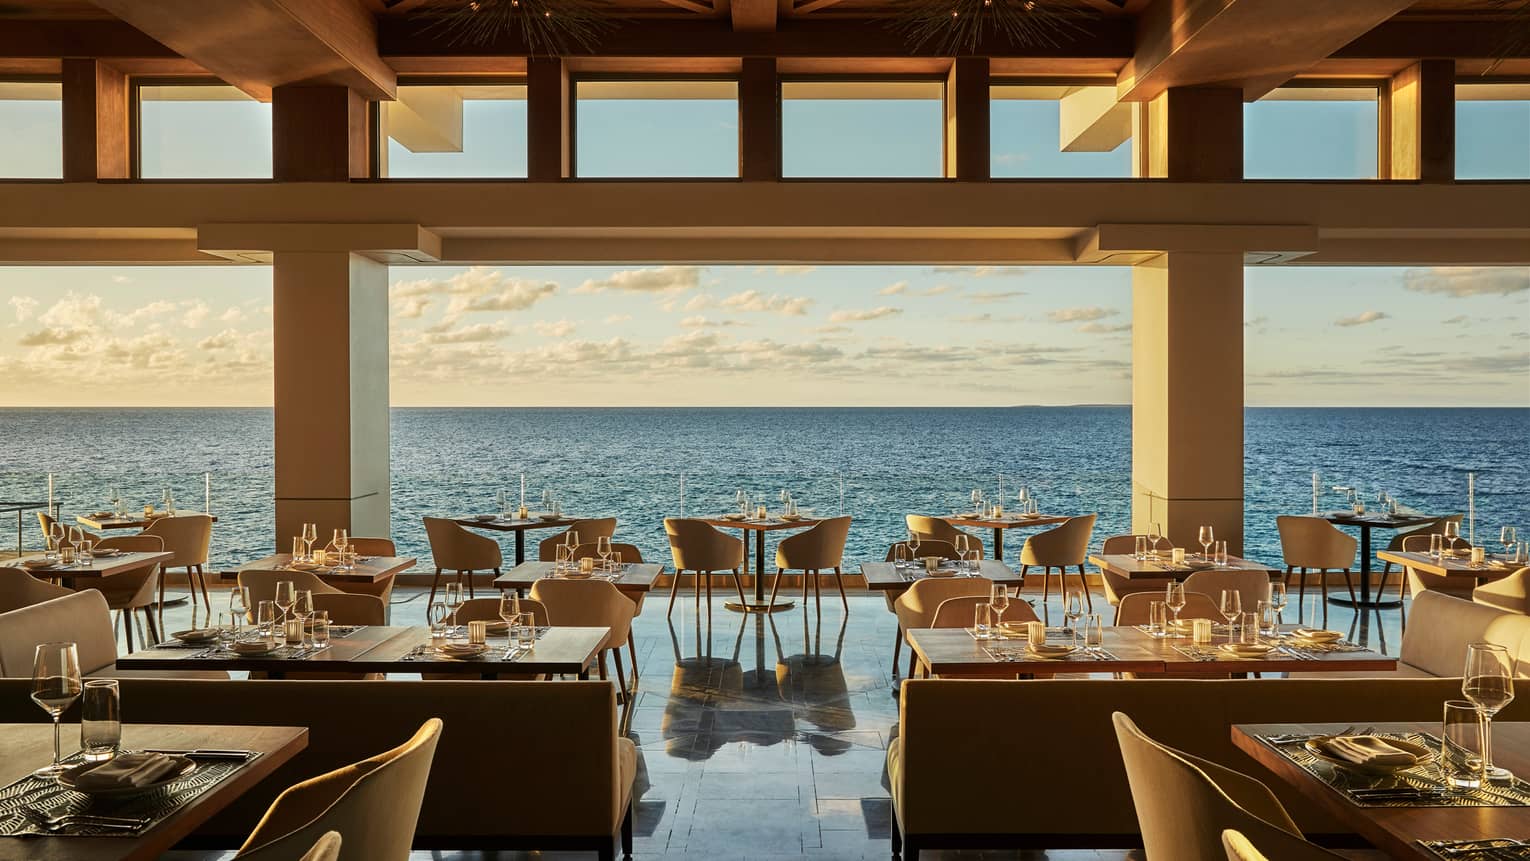 Elegant Coba open-air restaurant with dining tables and chairs, gleaming floors over open ocean